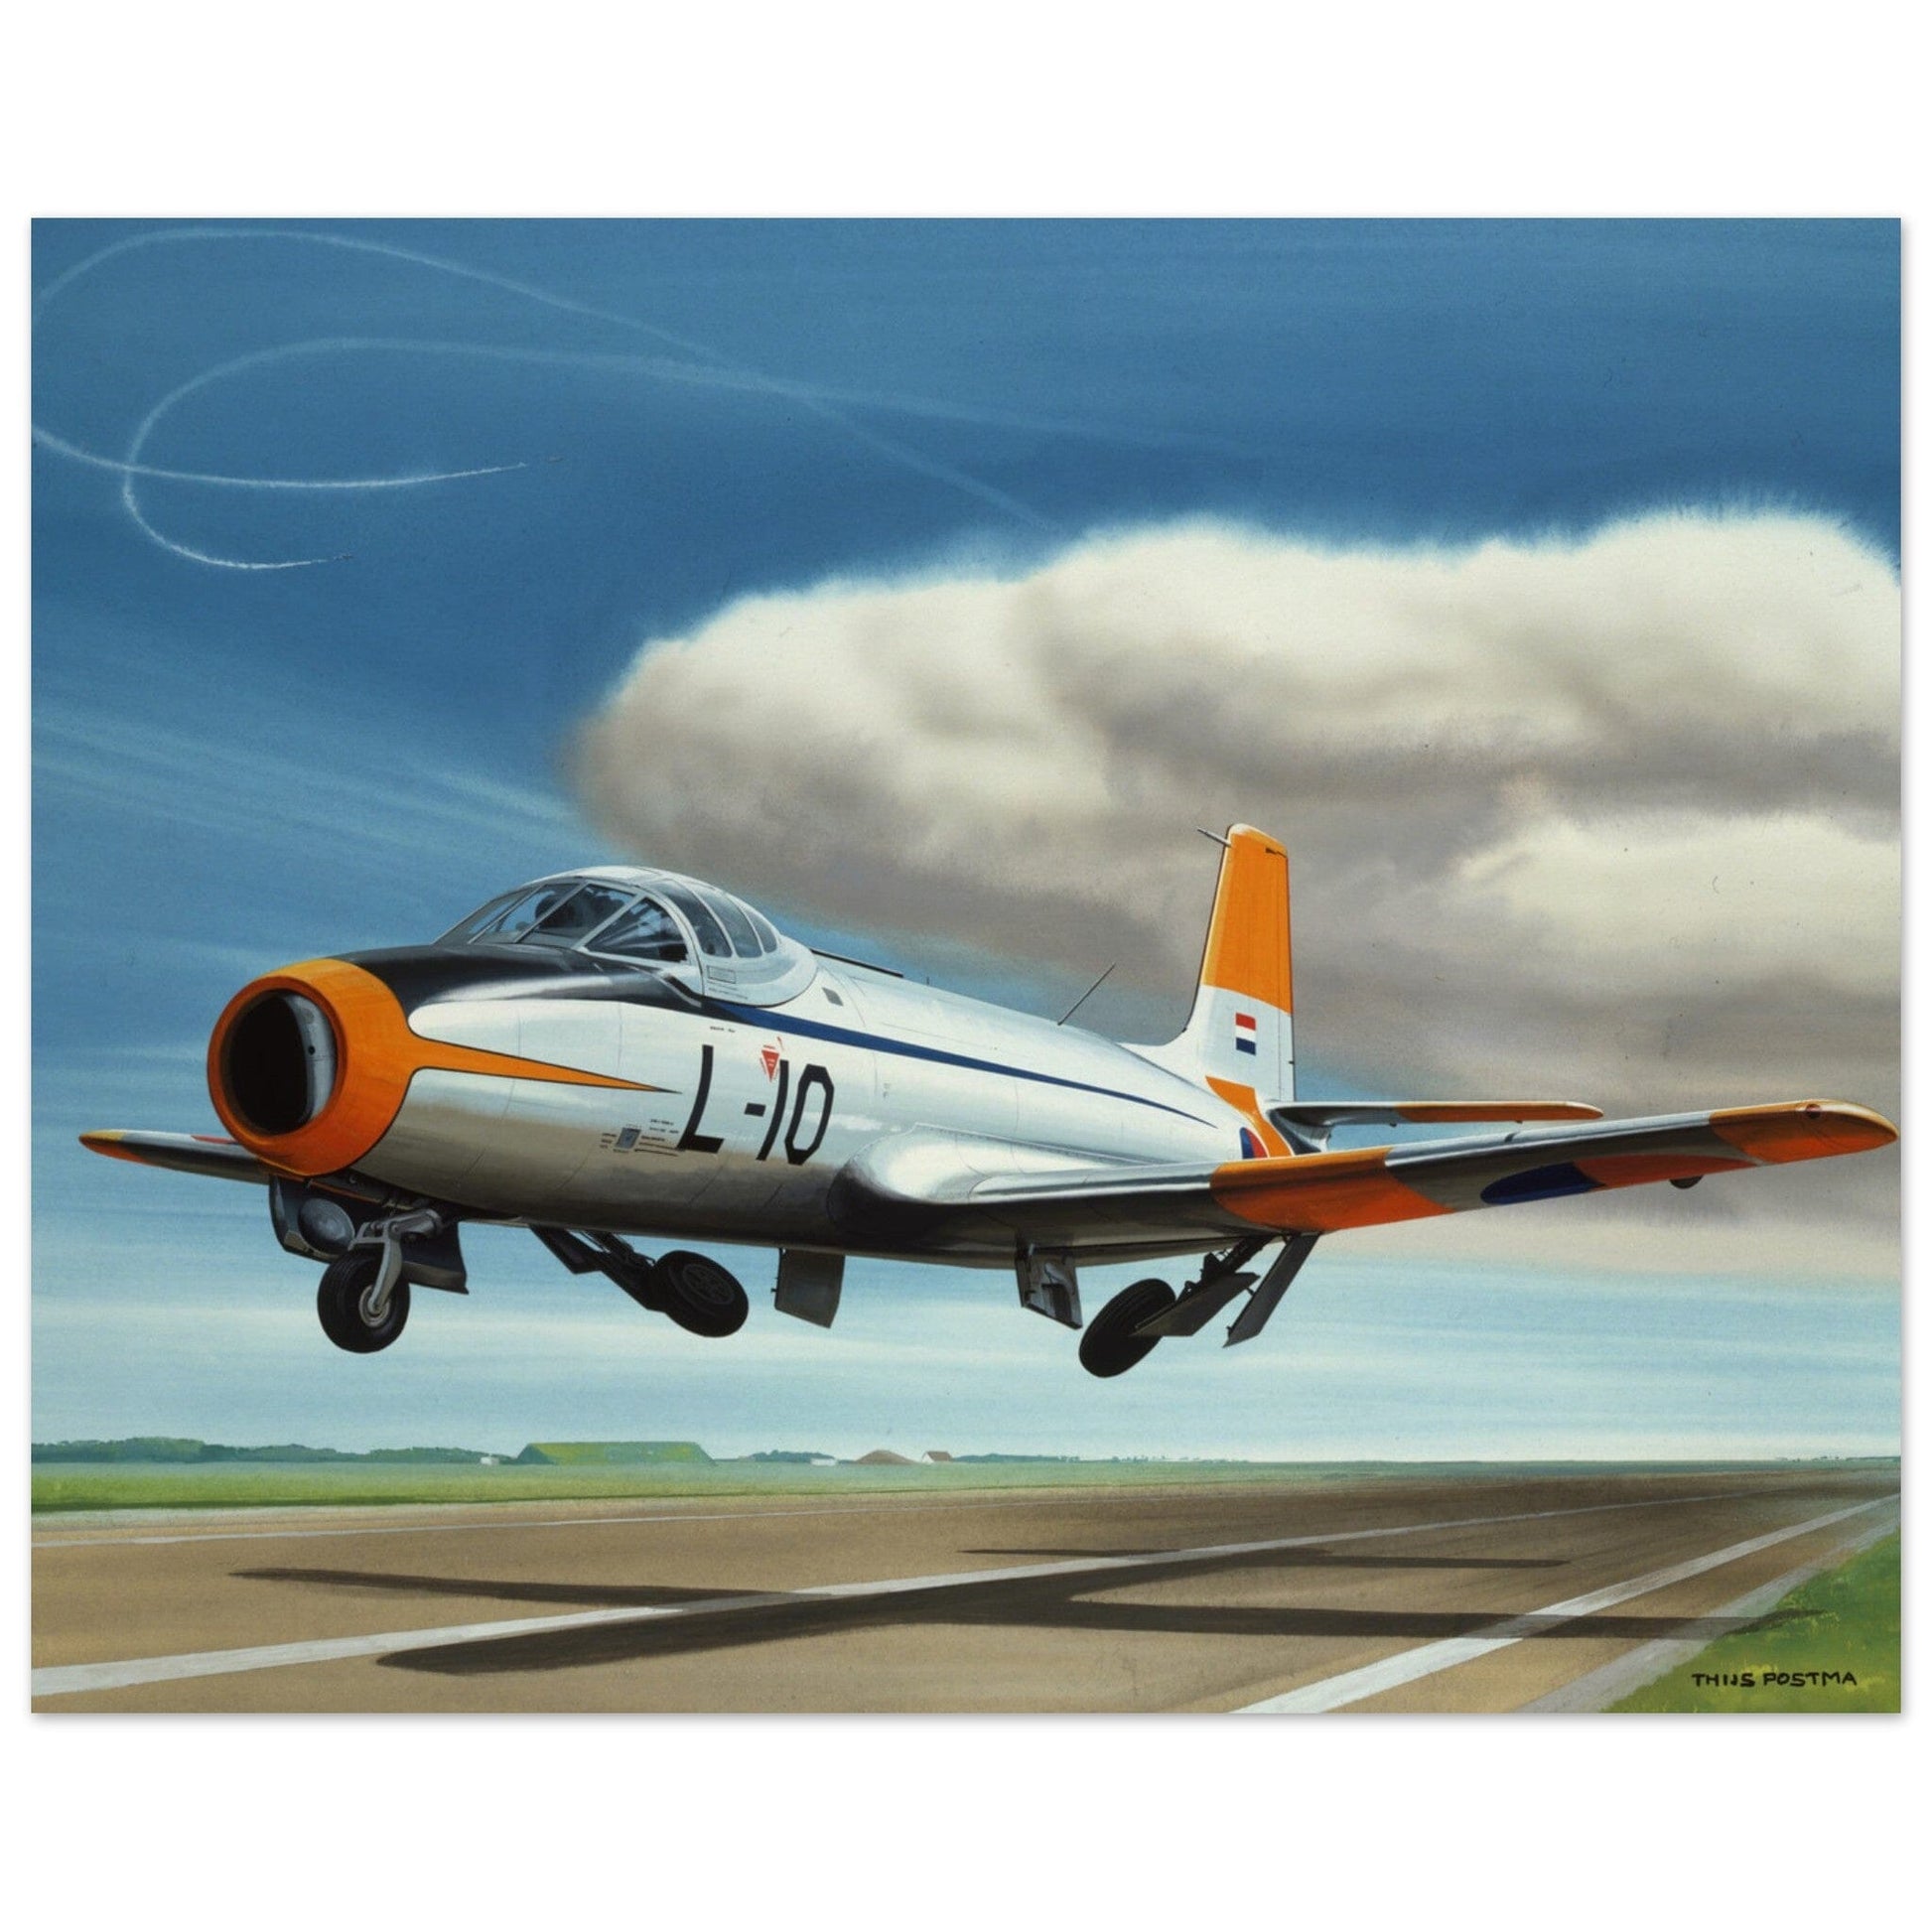 Thijs Postma - Poster - Fokker S-14 Mach Trainer Poster Only TP Aviation Art 40x50 cm / 16x20″ 